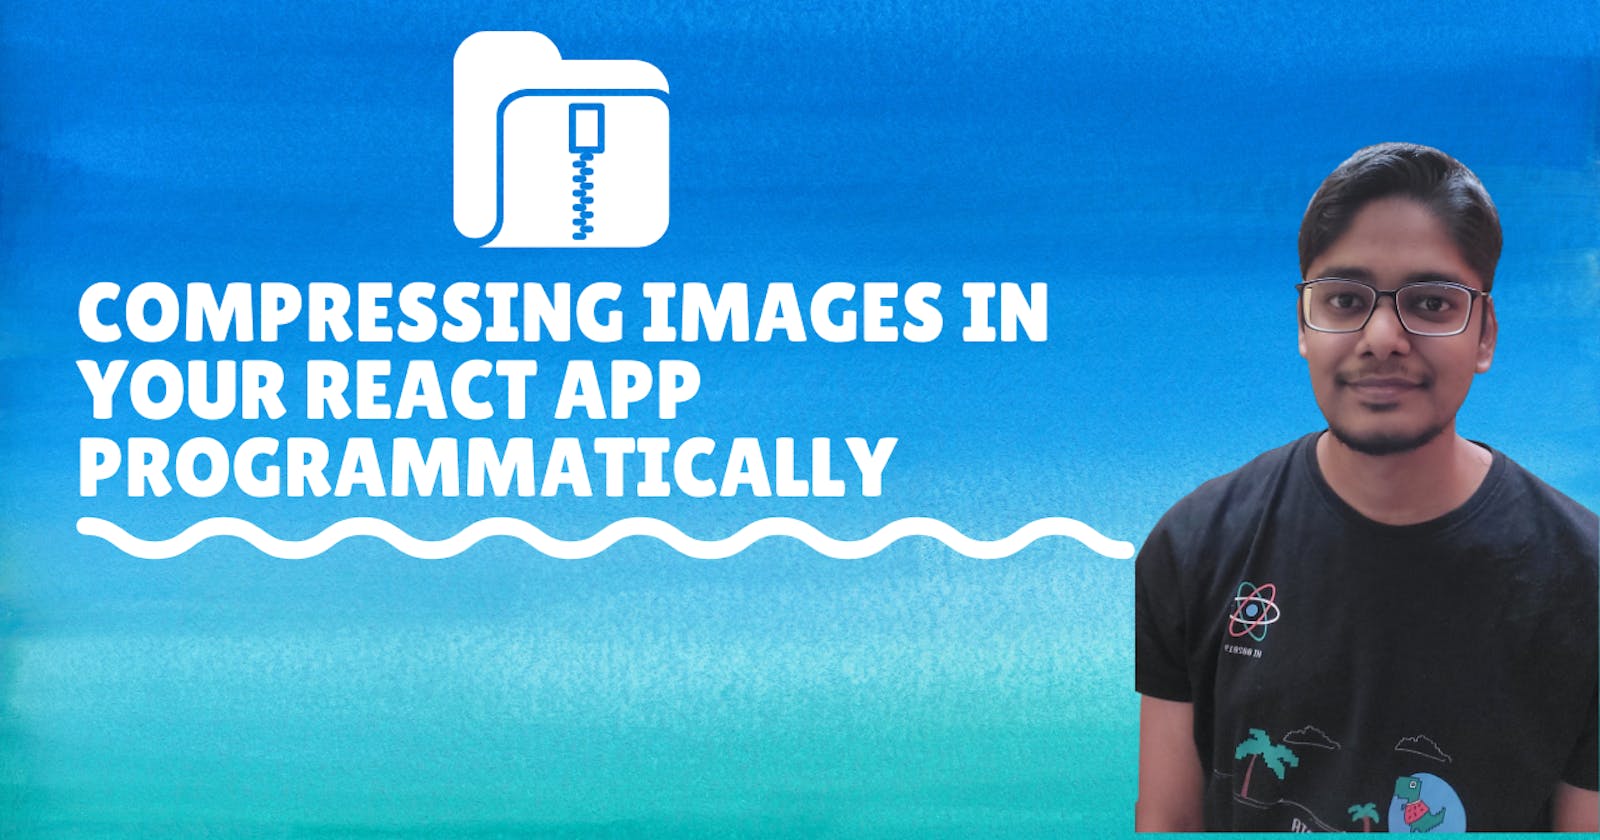 Compressing images in your react app programmatically